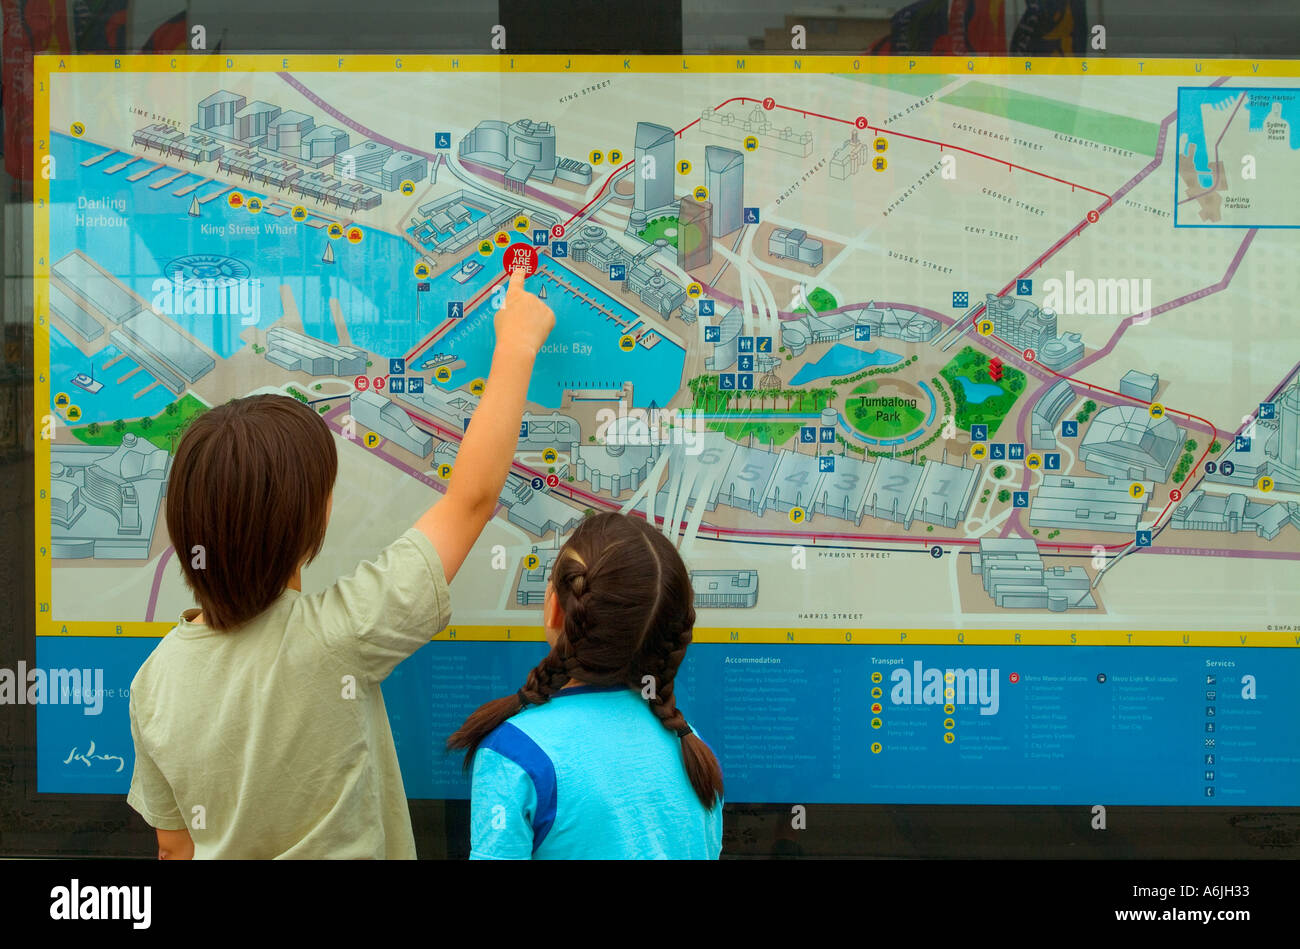 komponist justering måle Two children use a city directory map to locate their position Stock Photo  - Alamy